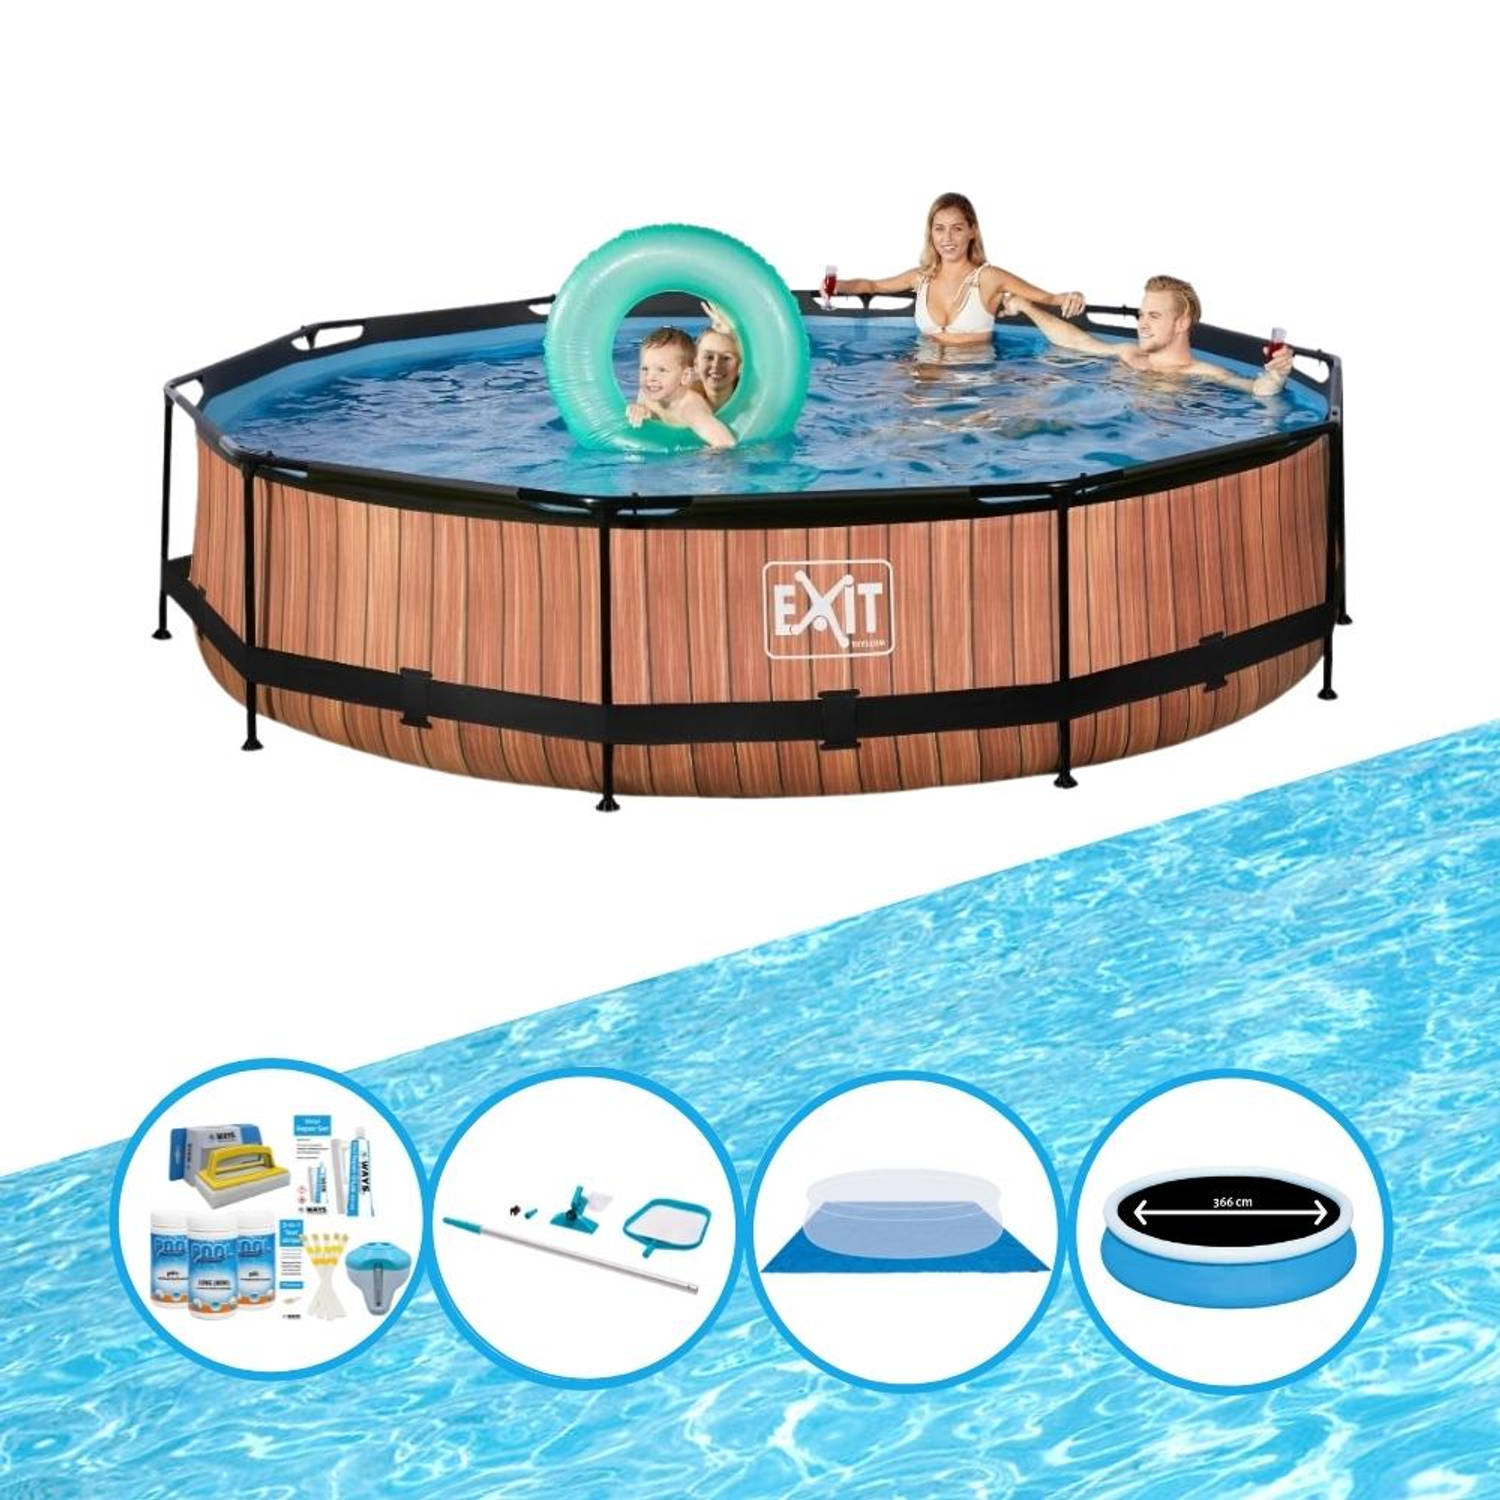 EXIT Toys Exit Zwembad Timber Style - Frame Pool ø360x76cm - Zwembad Deal - Bruin